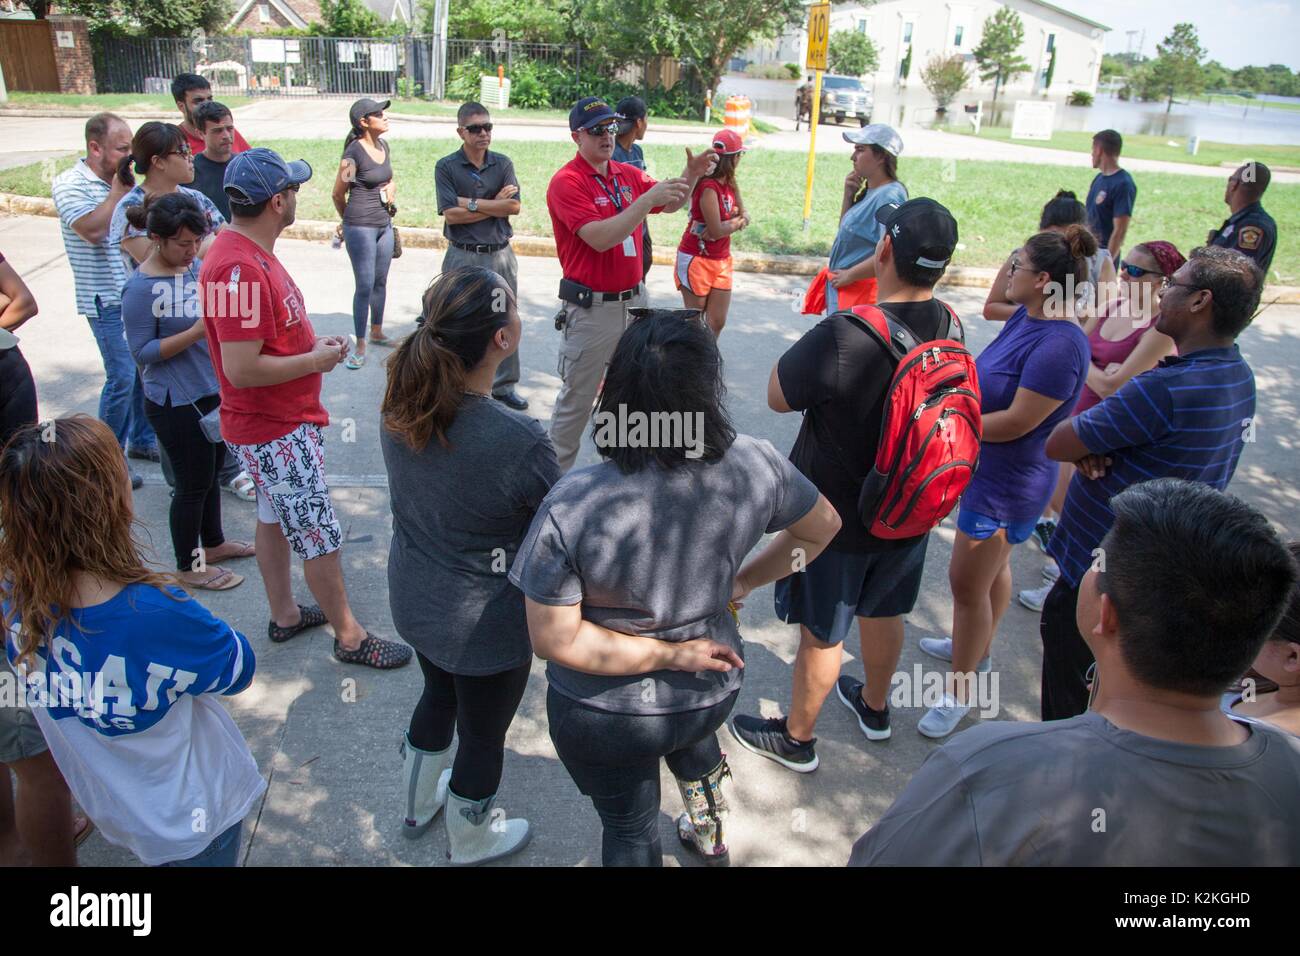 Houston, USA. August 31, 2017: Harris County ESD 48 Public Information Officer Lieutenant Simon VanDyk (center) briefs flood victims who were evacuated from their homes due to flooding caused by Hurricane Harvey in Houston, TX. John Glaser/CSM./Alamy Live News Stock Photo